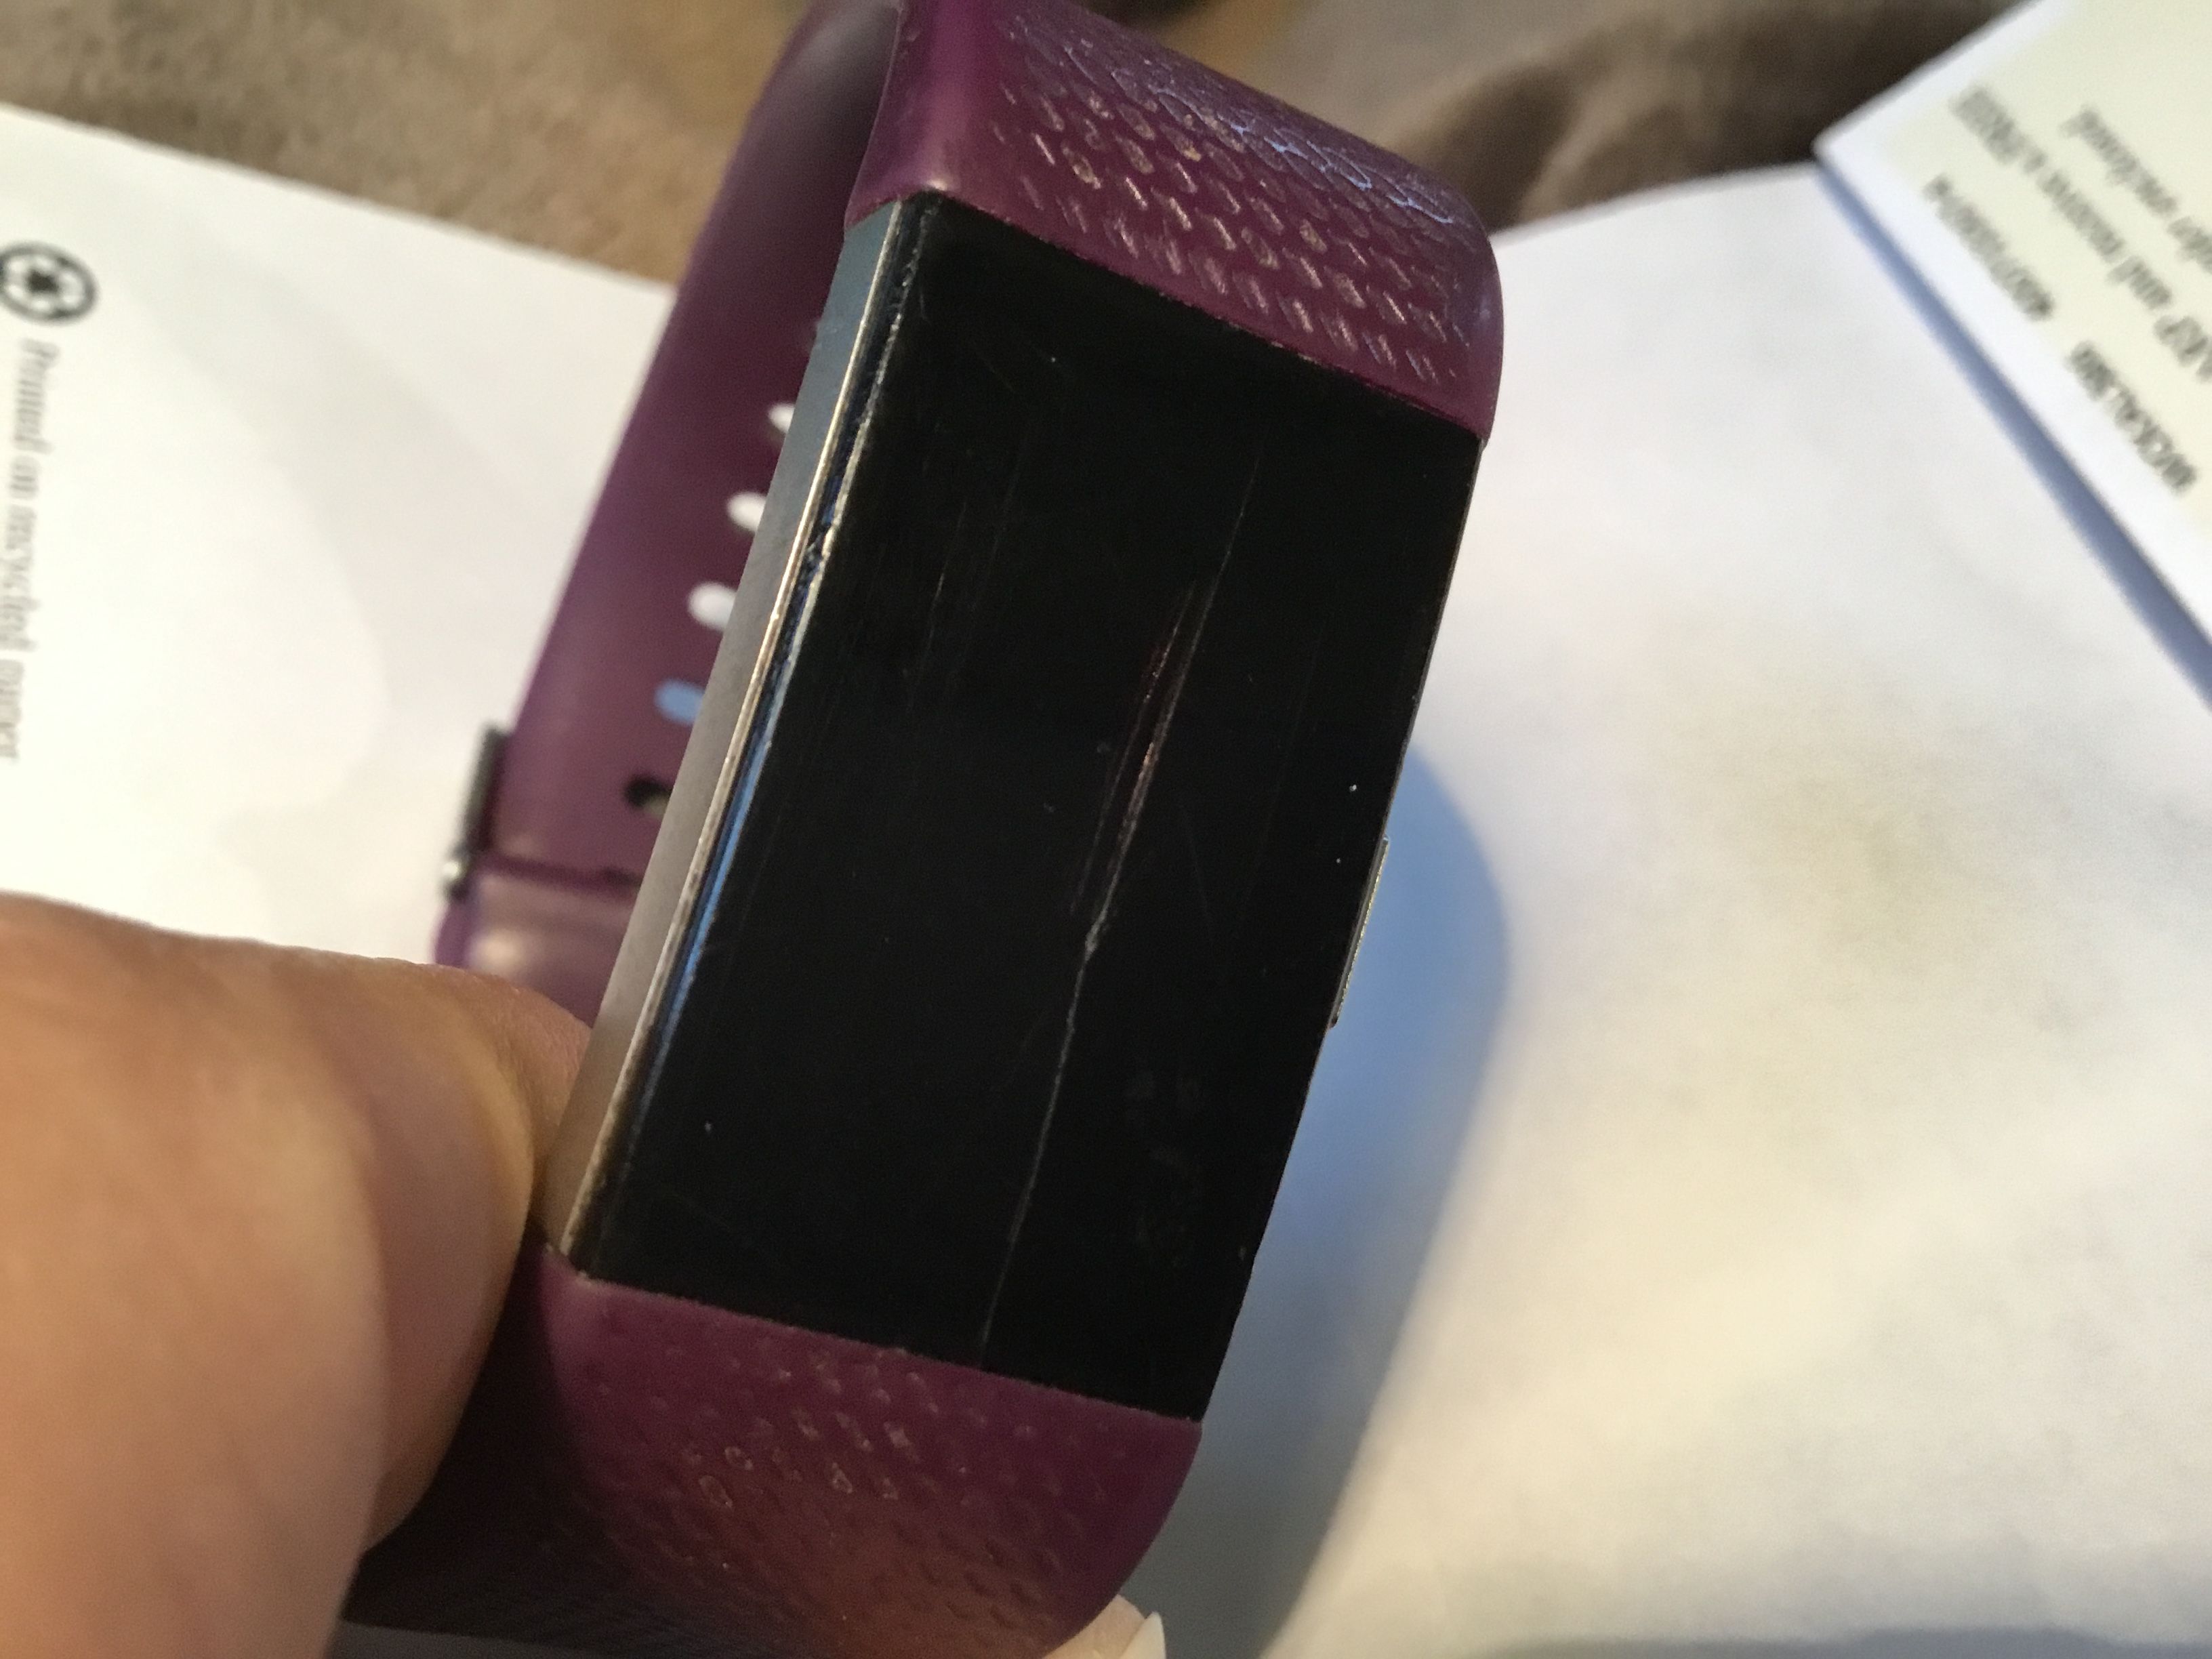 fitbit charge 2 lens replacement